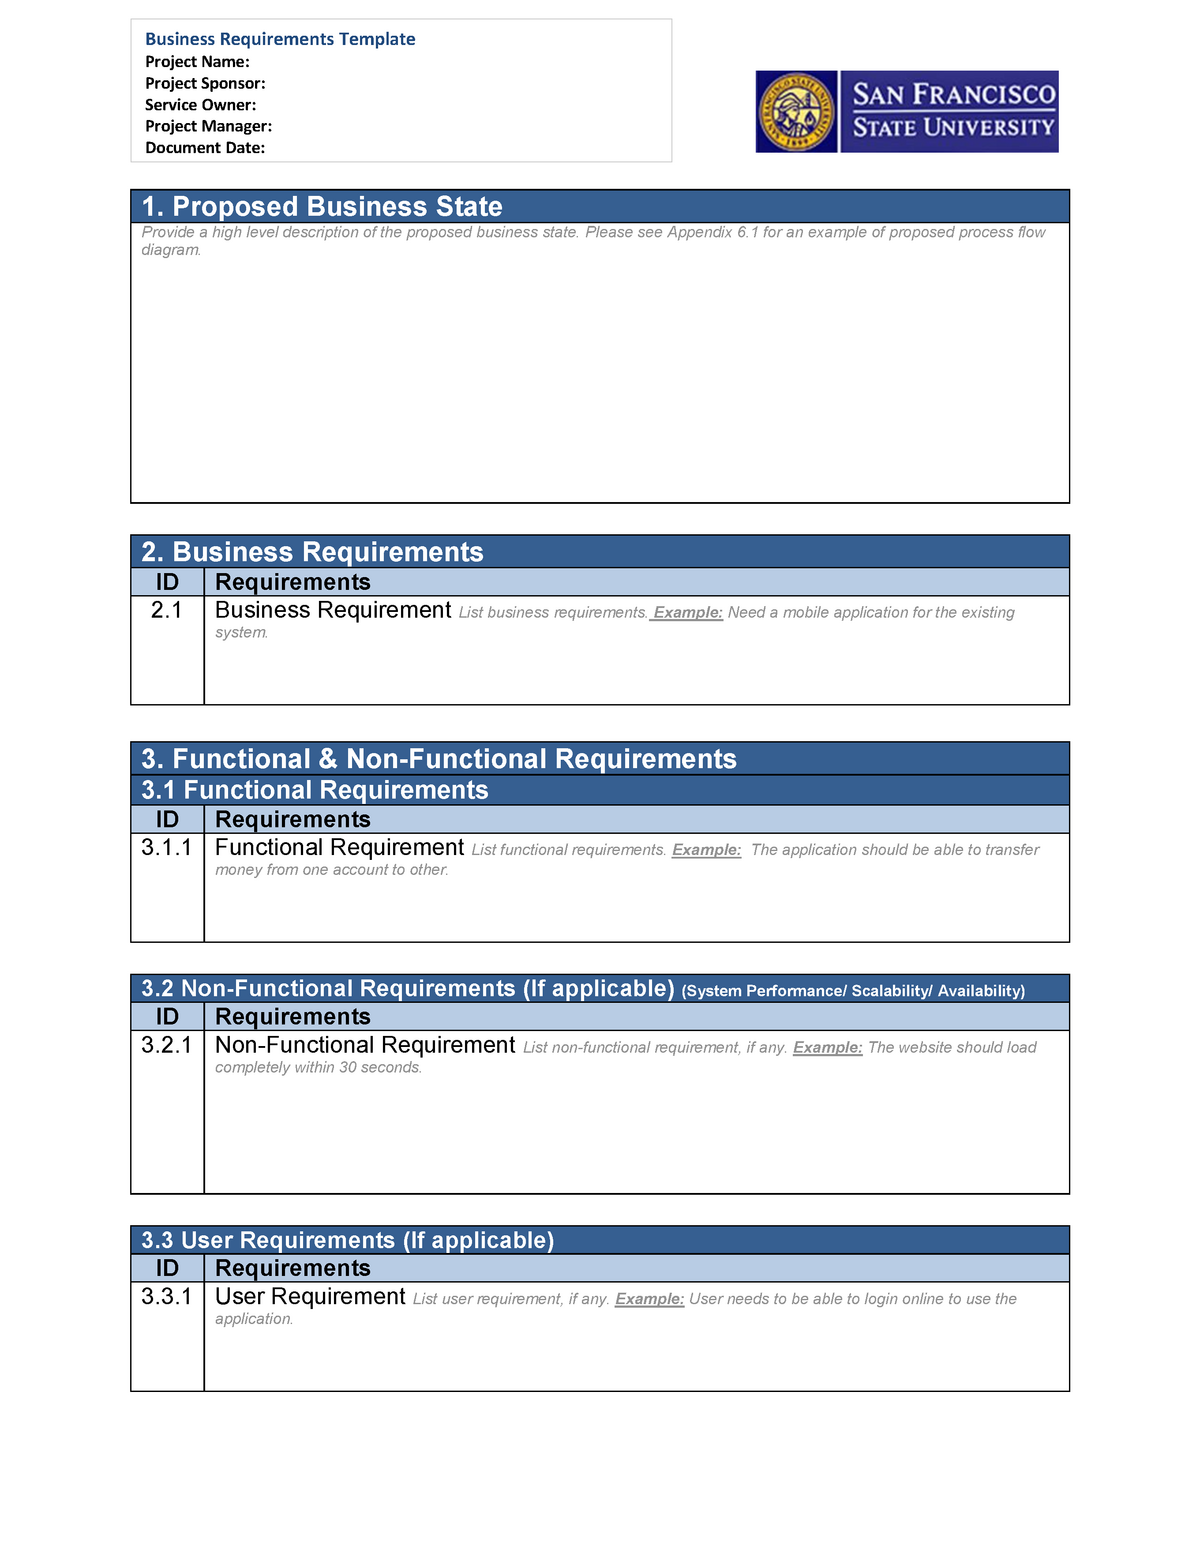 Sfsu business requirements template v20 - MBA - 2003 - SPPU - StuDocu Pertaining To Project Business Requirements Document Template